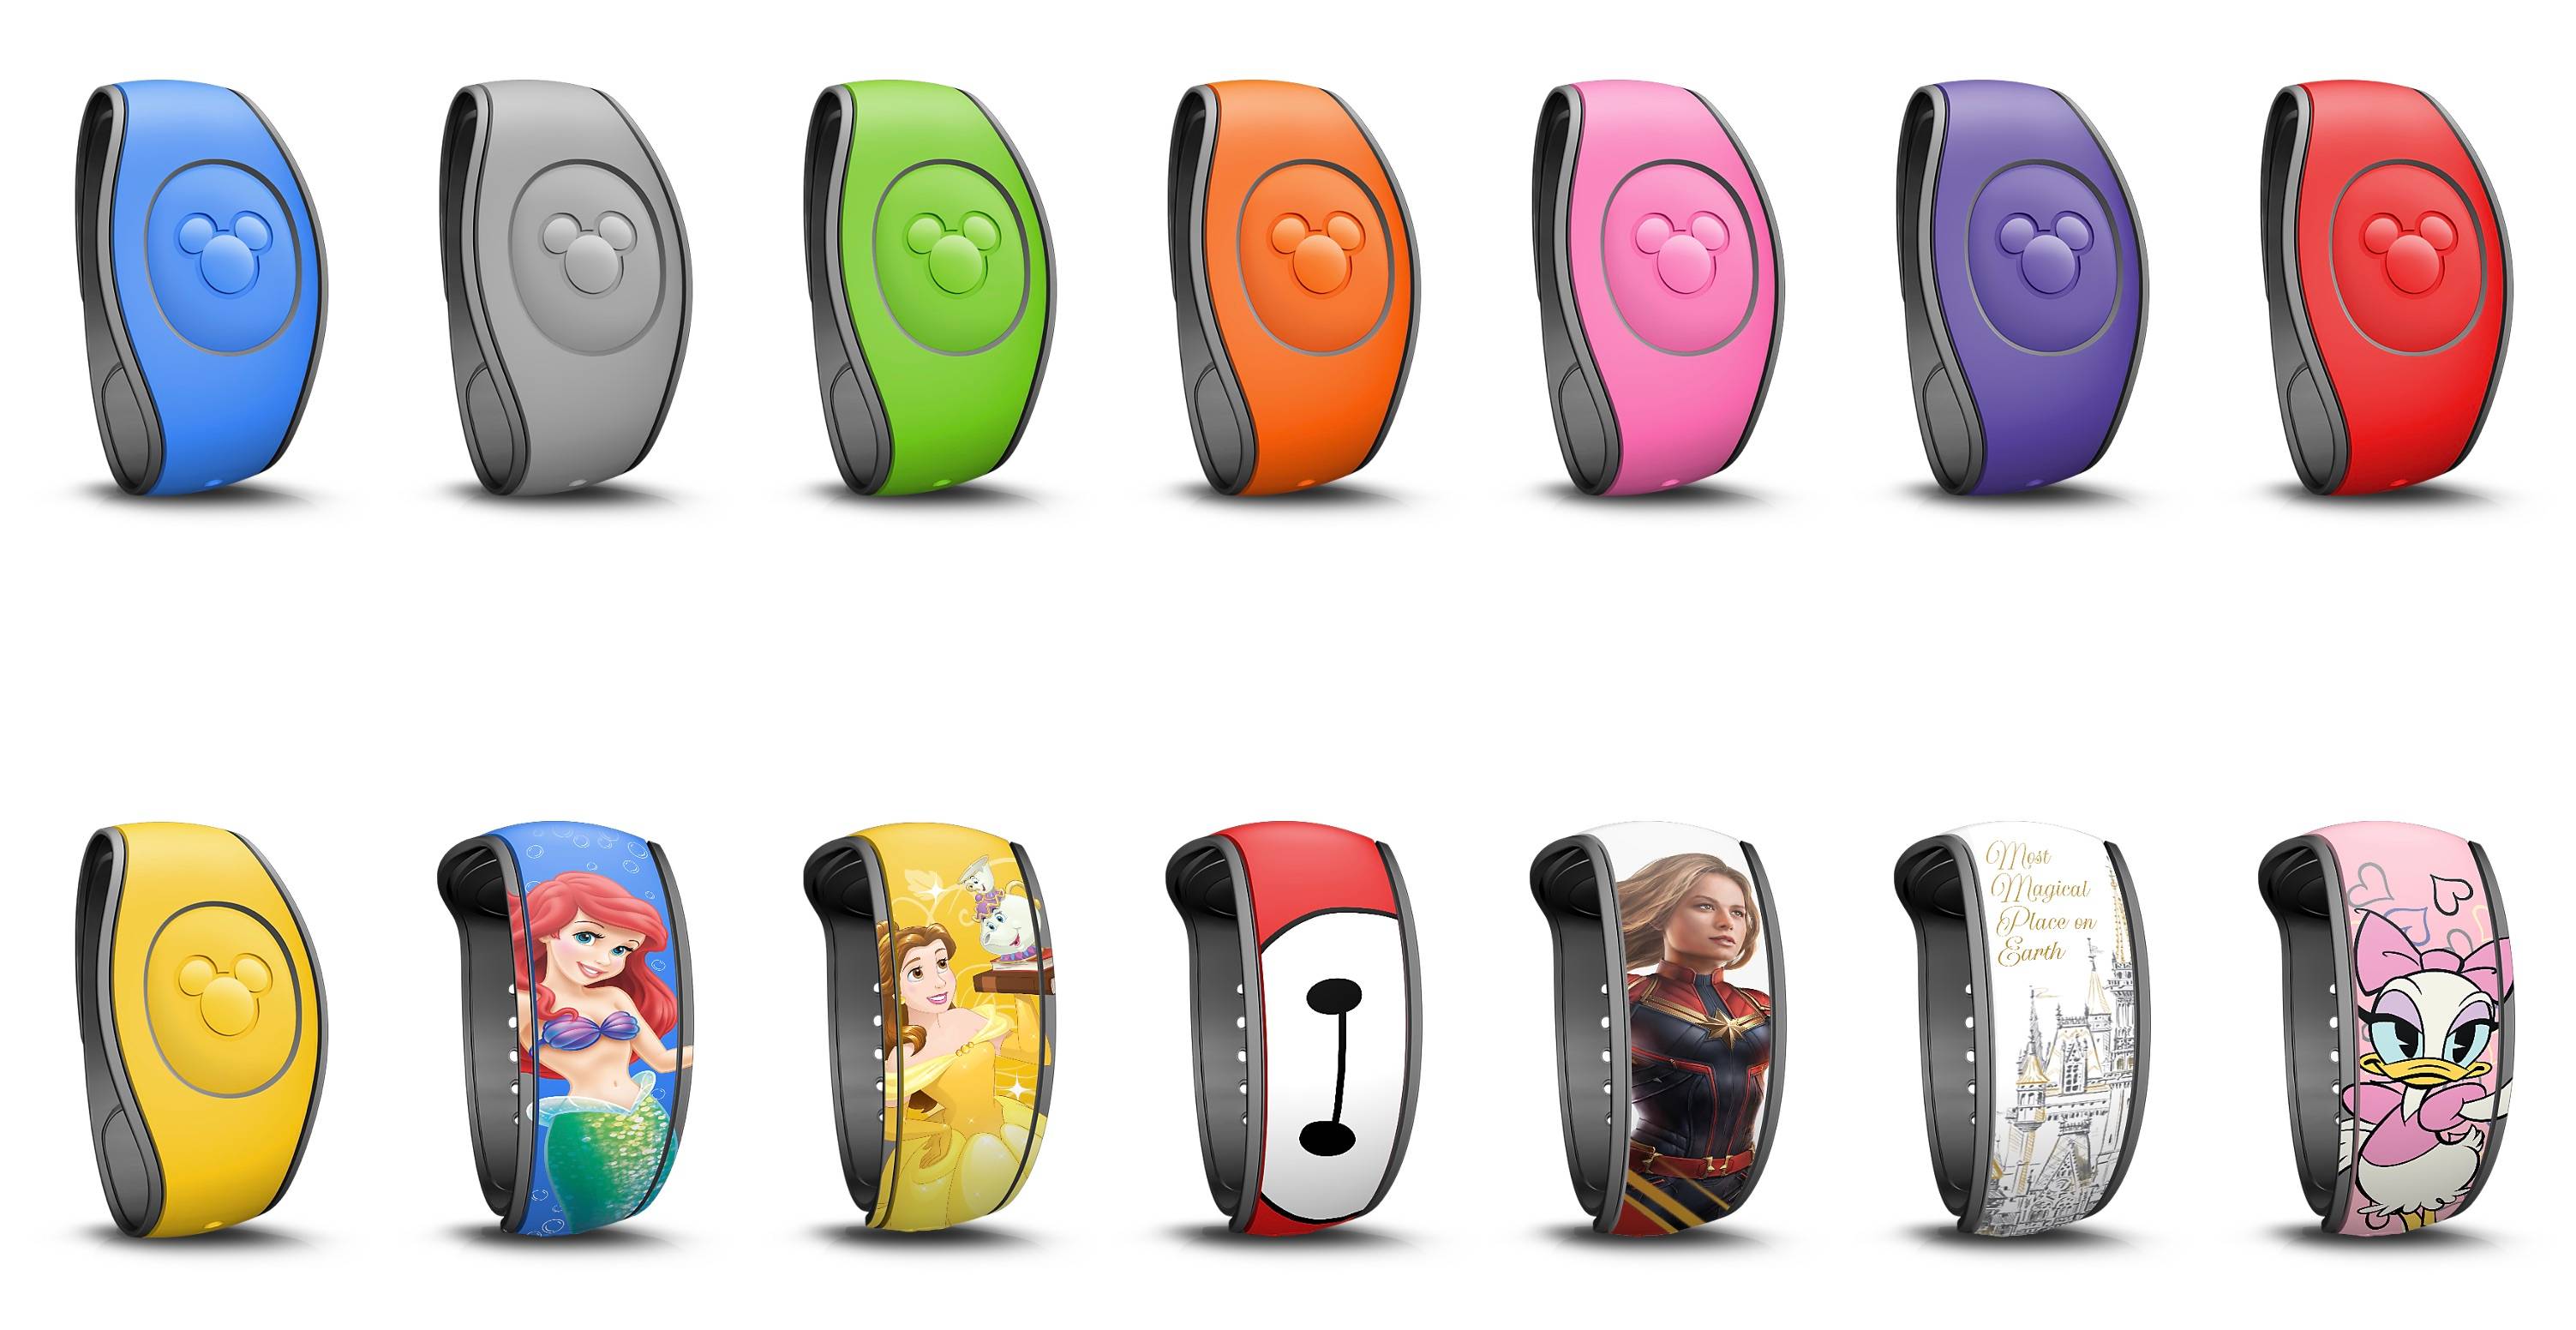 MagicBands quickly became ubquitos at Walt Disney World